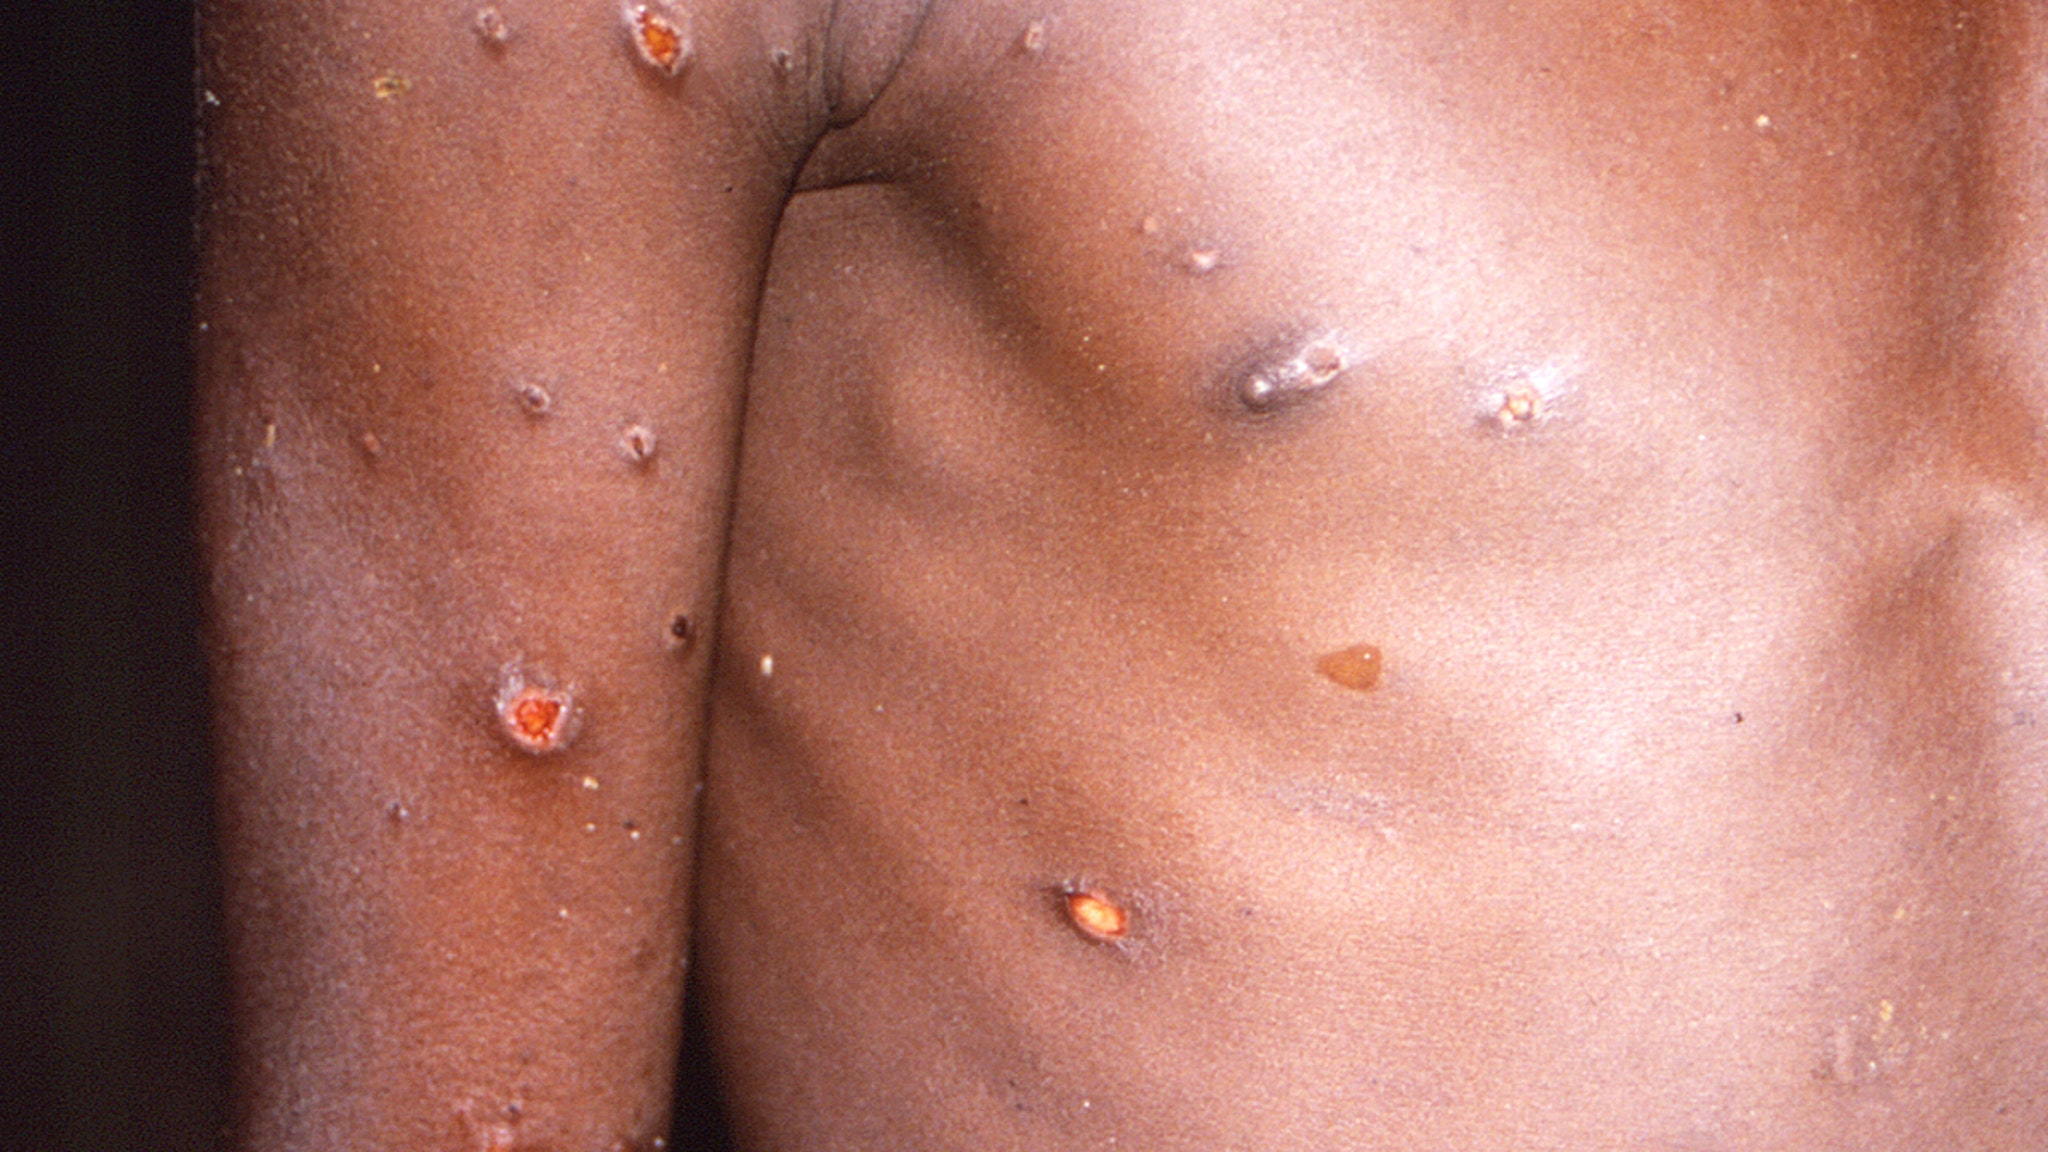 Monkeypox, First Possible Human-to-Human Transmission Spotted in U.S.